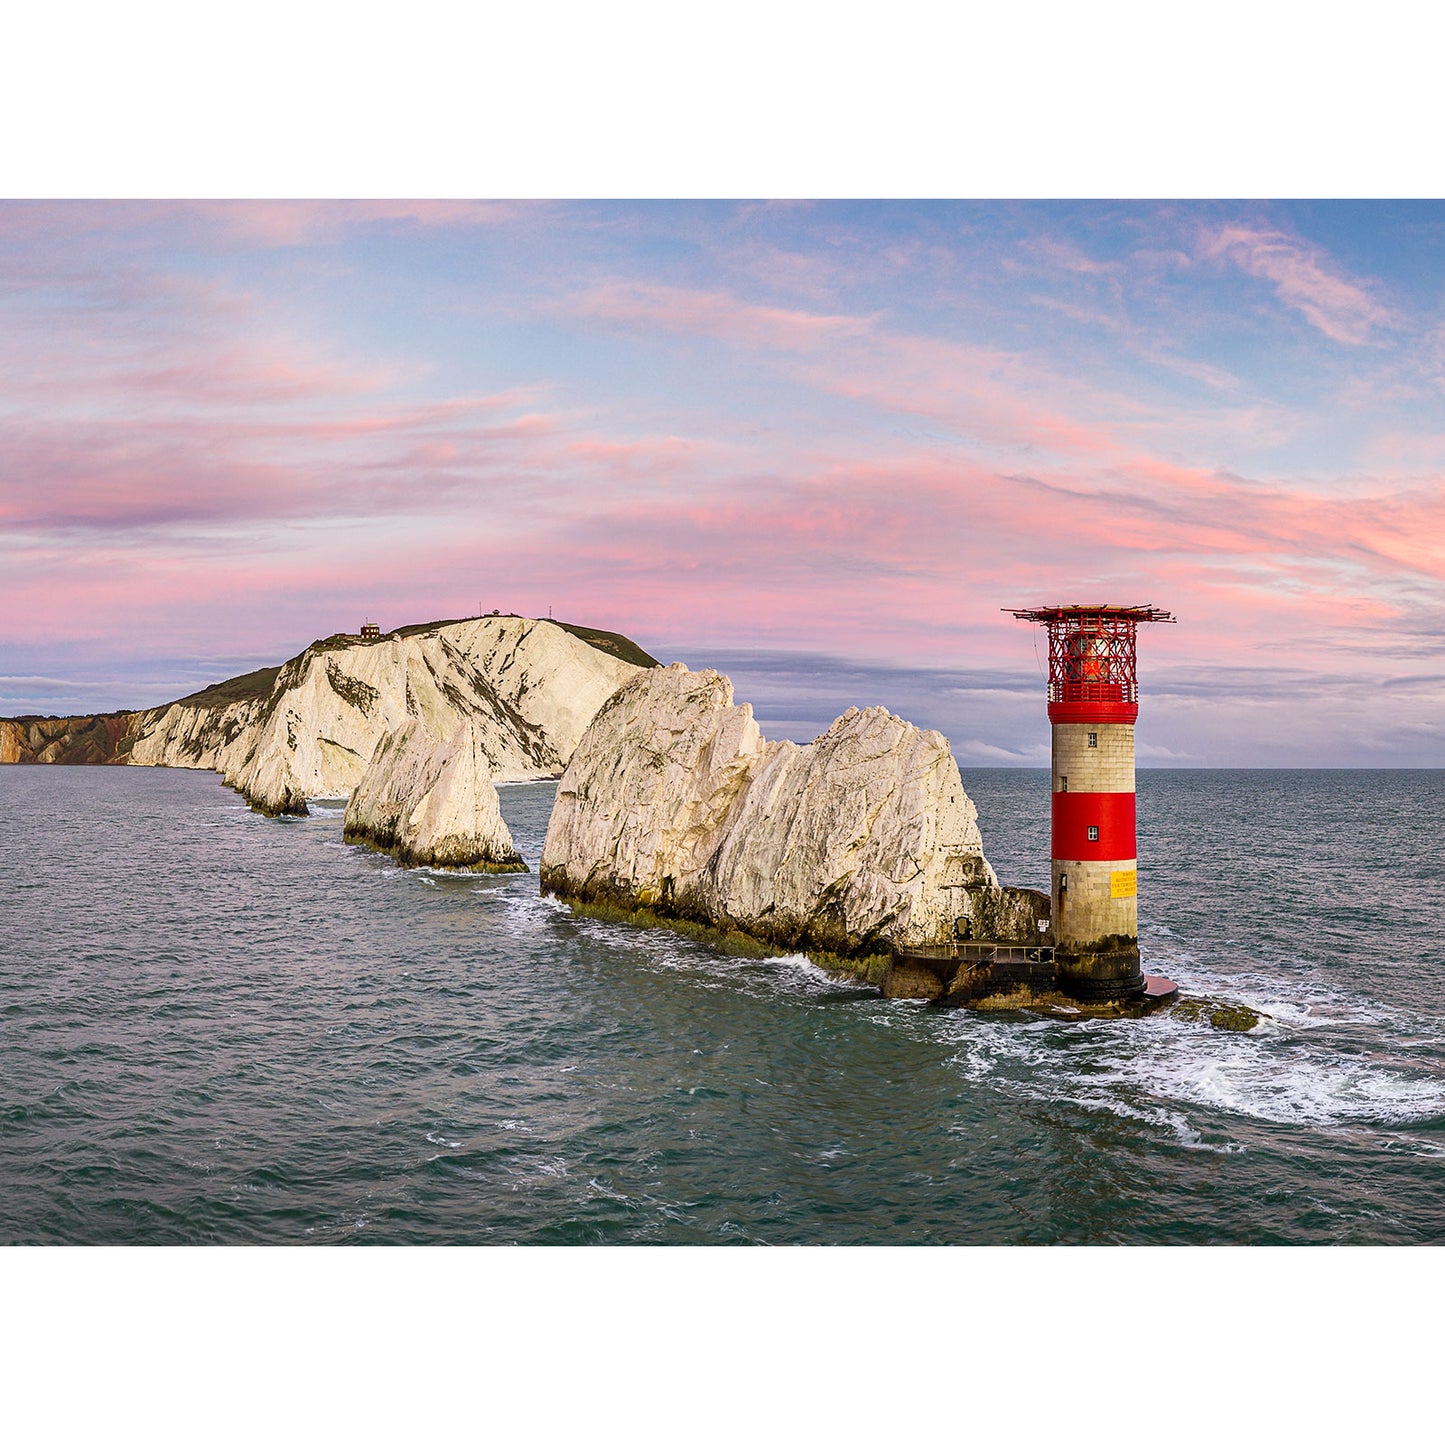 A "The Needles" lighthouse stands on a rocky outcrop near a coastal cliff on the Isle of Wight under a soft pink sky by Available Light Photography.